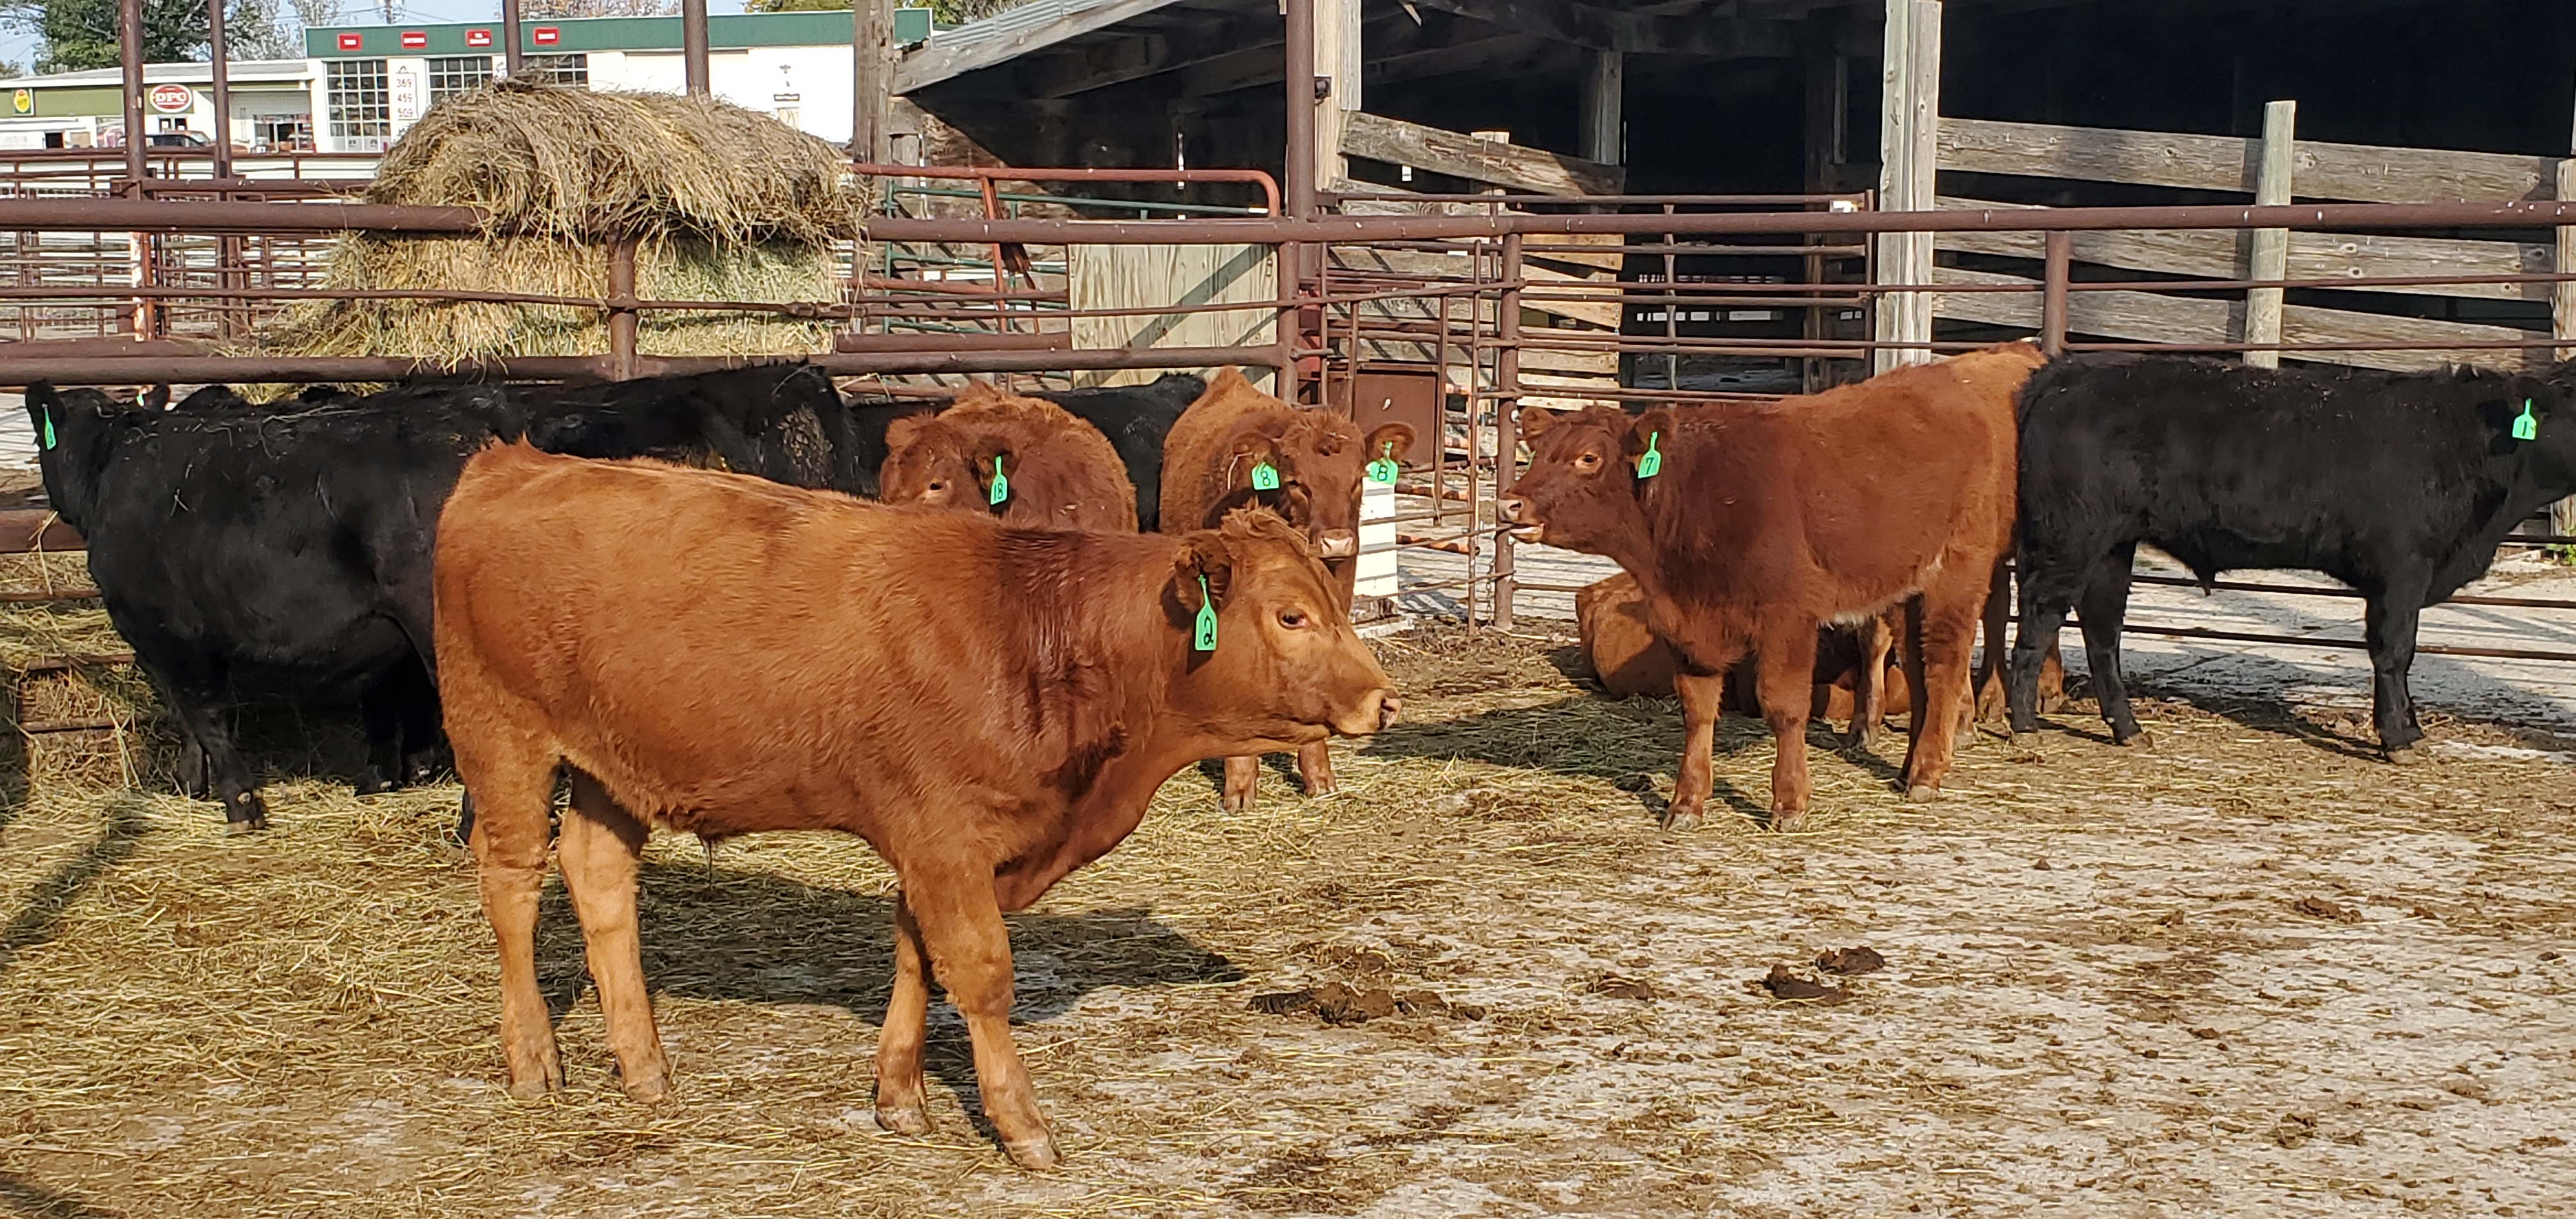 An NDSU Extension webinar on Nov. 28 will cover factors that impact backgrounding decisions, including feed costs, calf prices, market outlook and calf health. (NDSU photo)